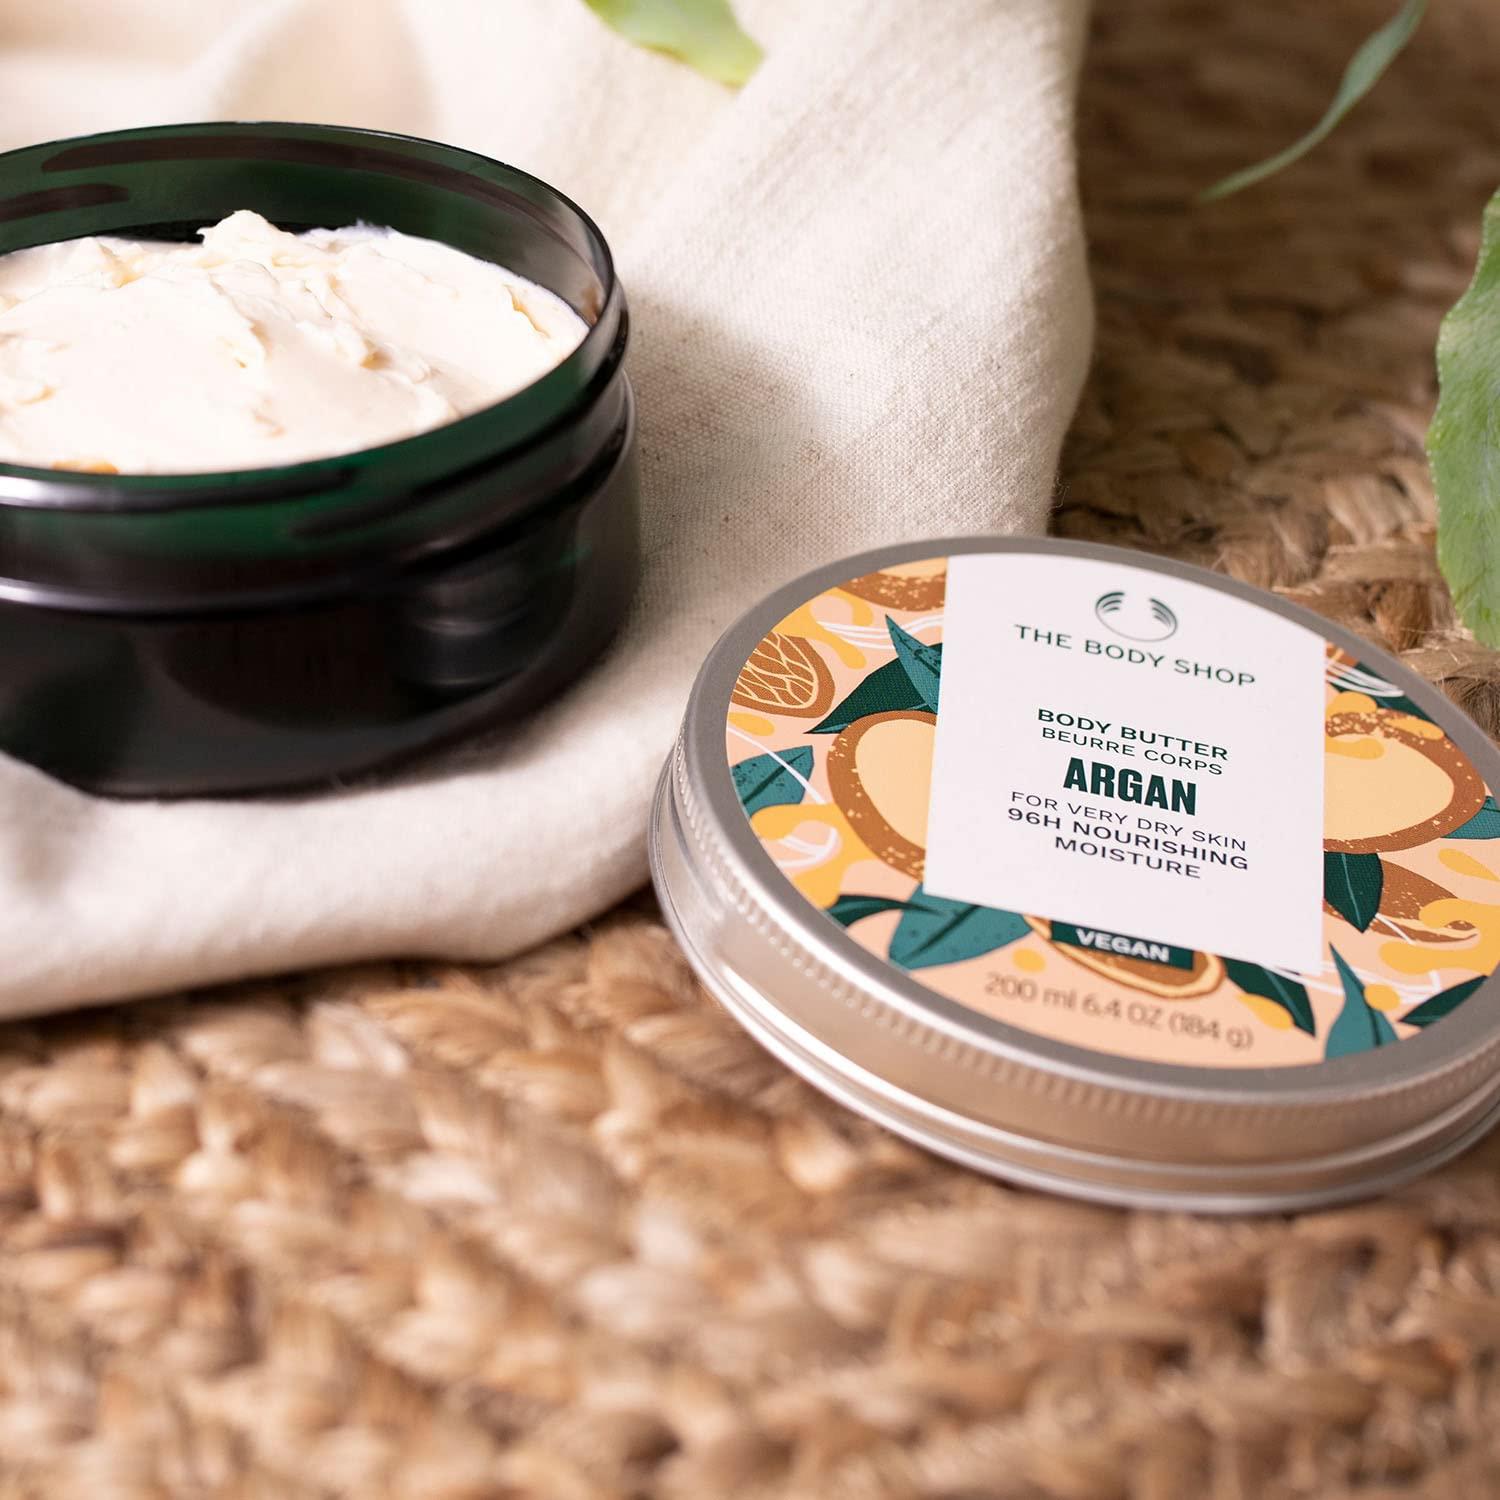  The Body Shop Shea Body Butter – Hydrating & Moisturizing  Skincare for Very Dry Skin – Vegan – 6.4 oz : Beauty & Personal Care